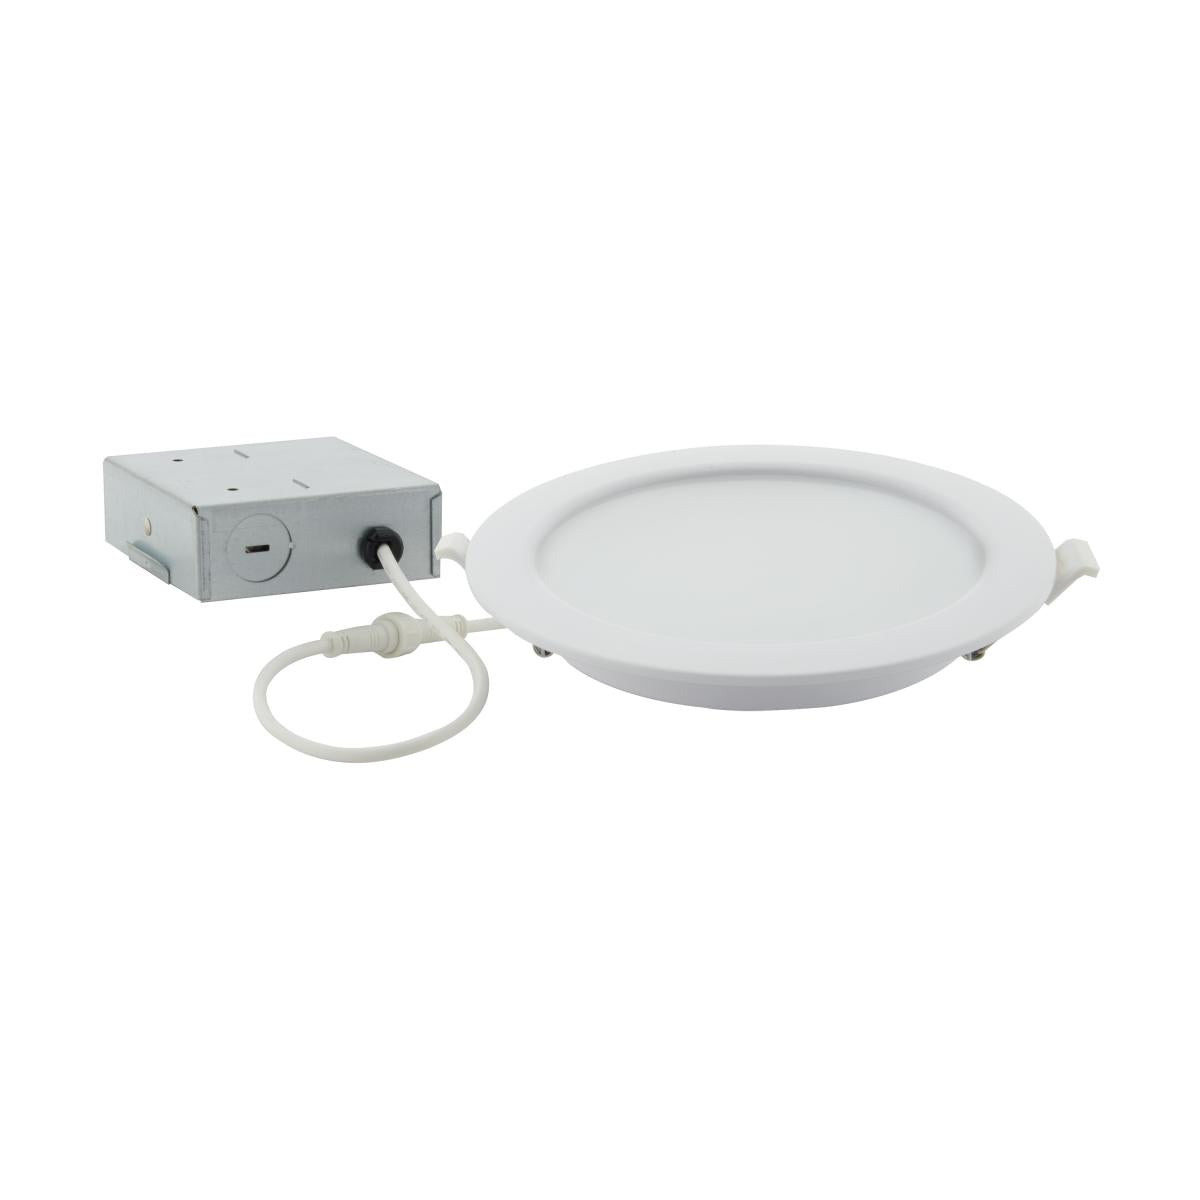 SATCO-S11262SATCO S11262 6" 12W LED Round Recessed Downlight Selectable CCT